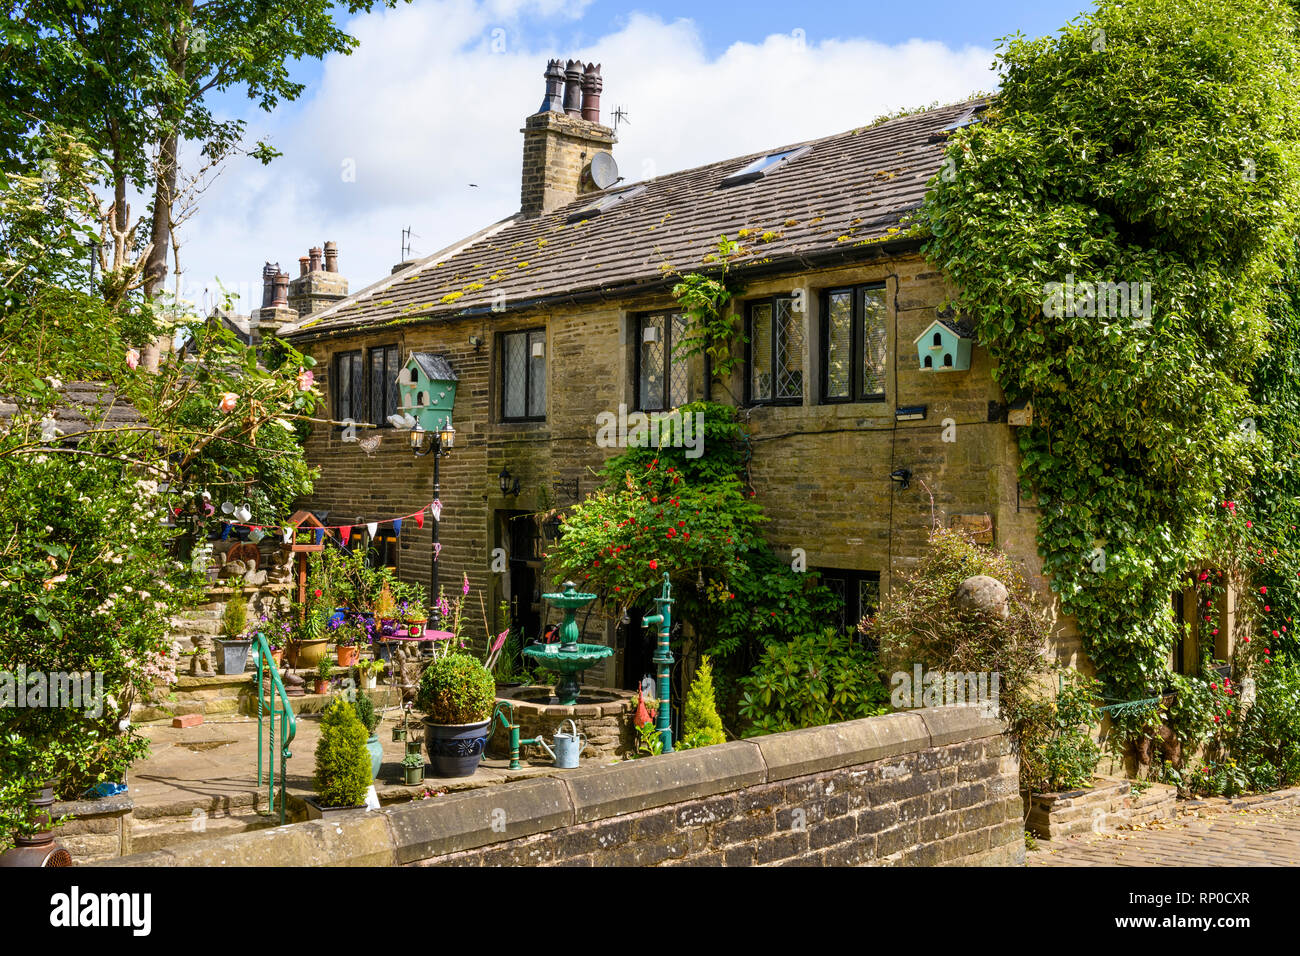 Attractive quaint traditional stone cottage with ornamental features in  patio garden (fountain & planters) - Haworth, West Yorkshire, England, UK Stock Photo